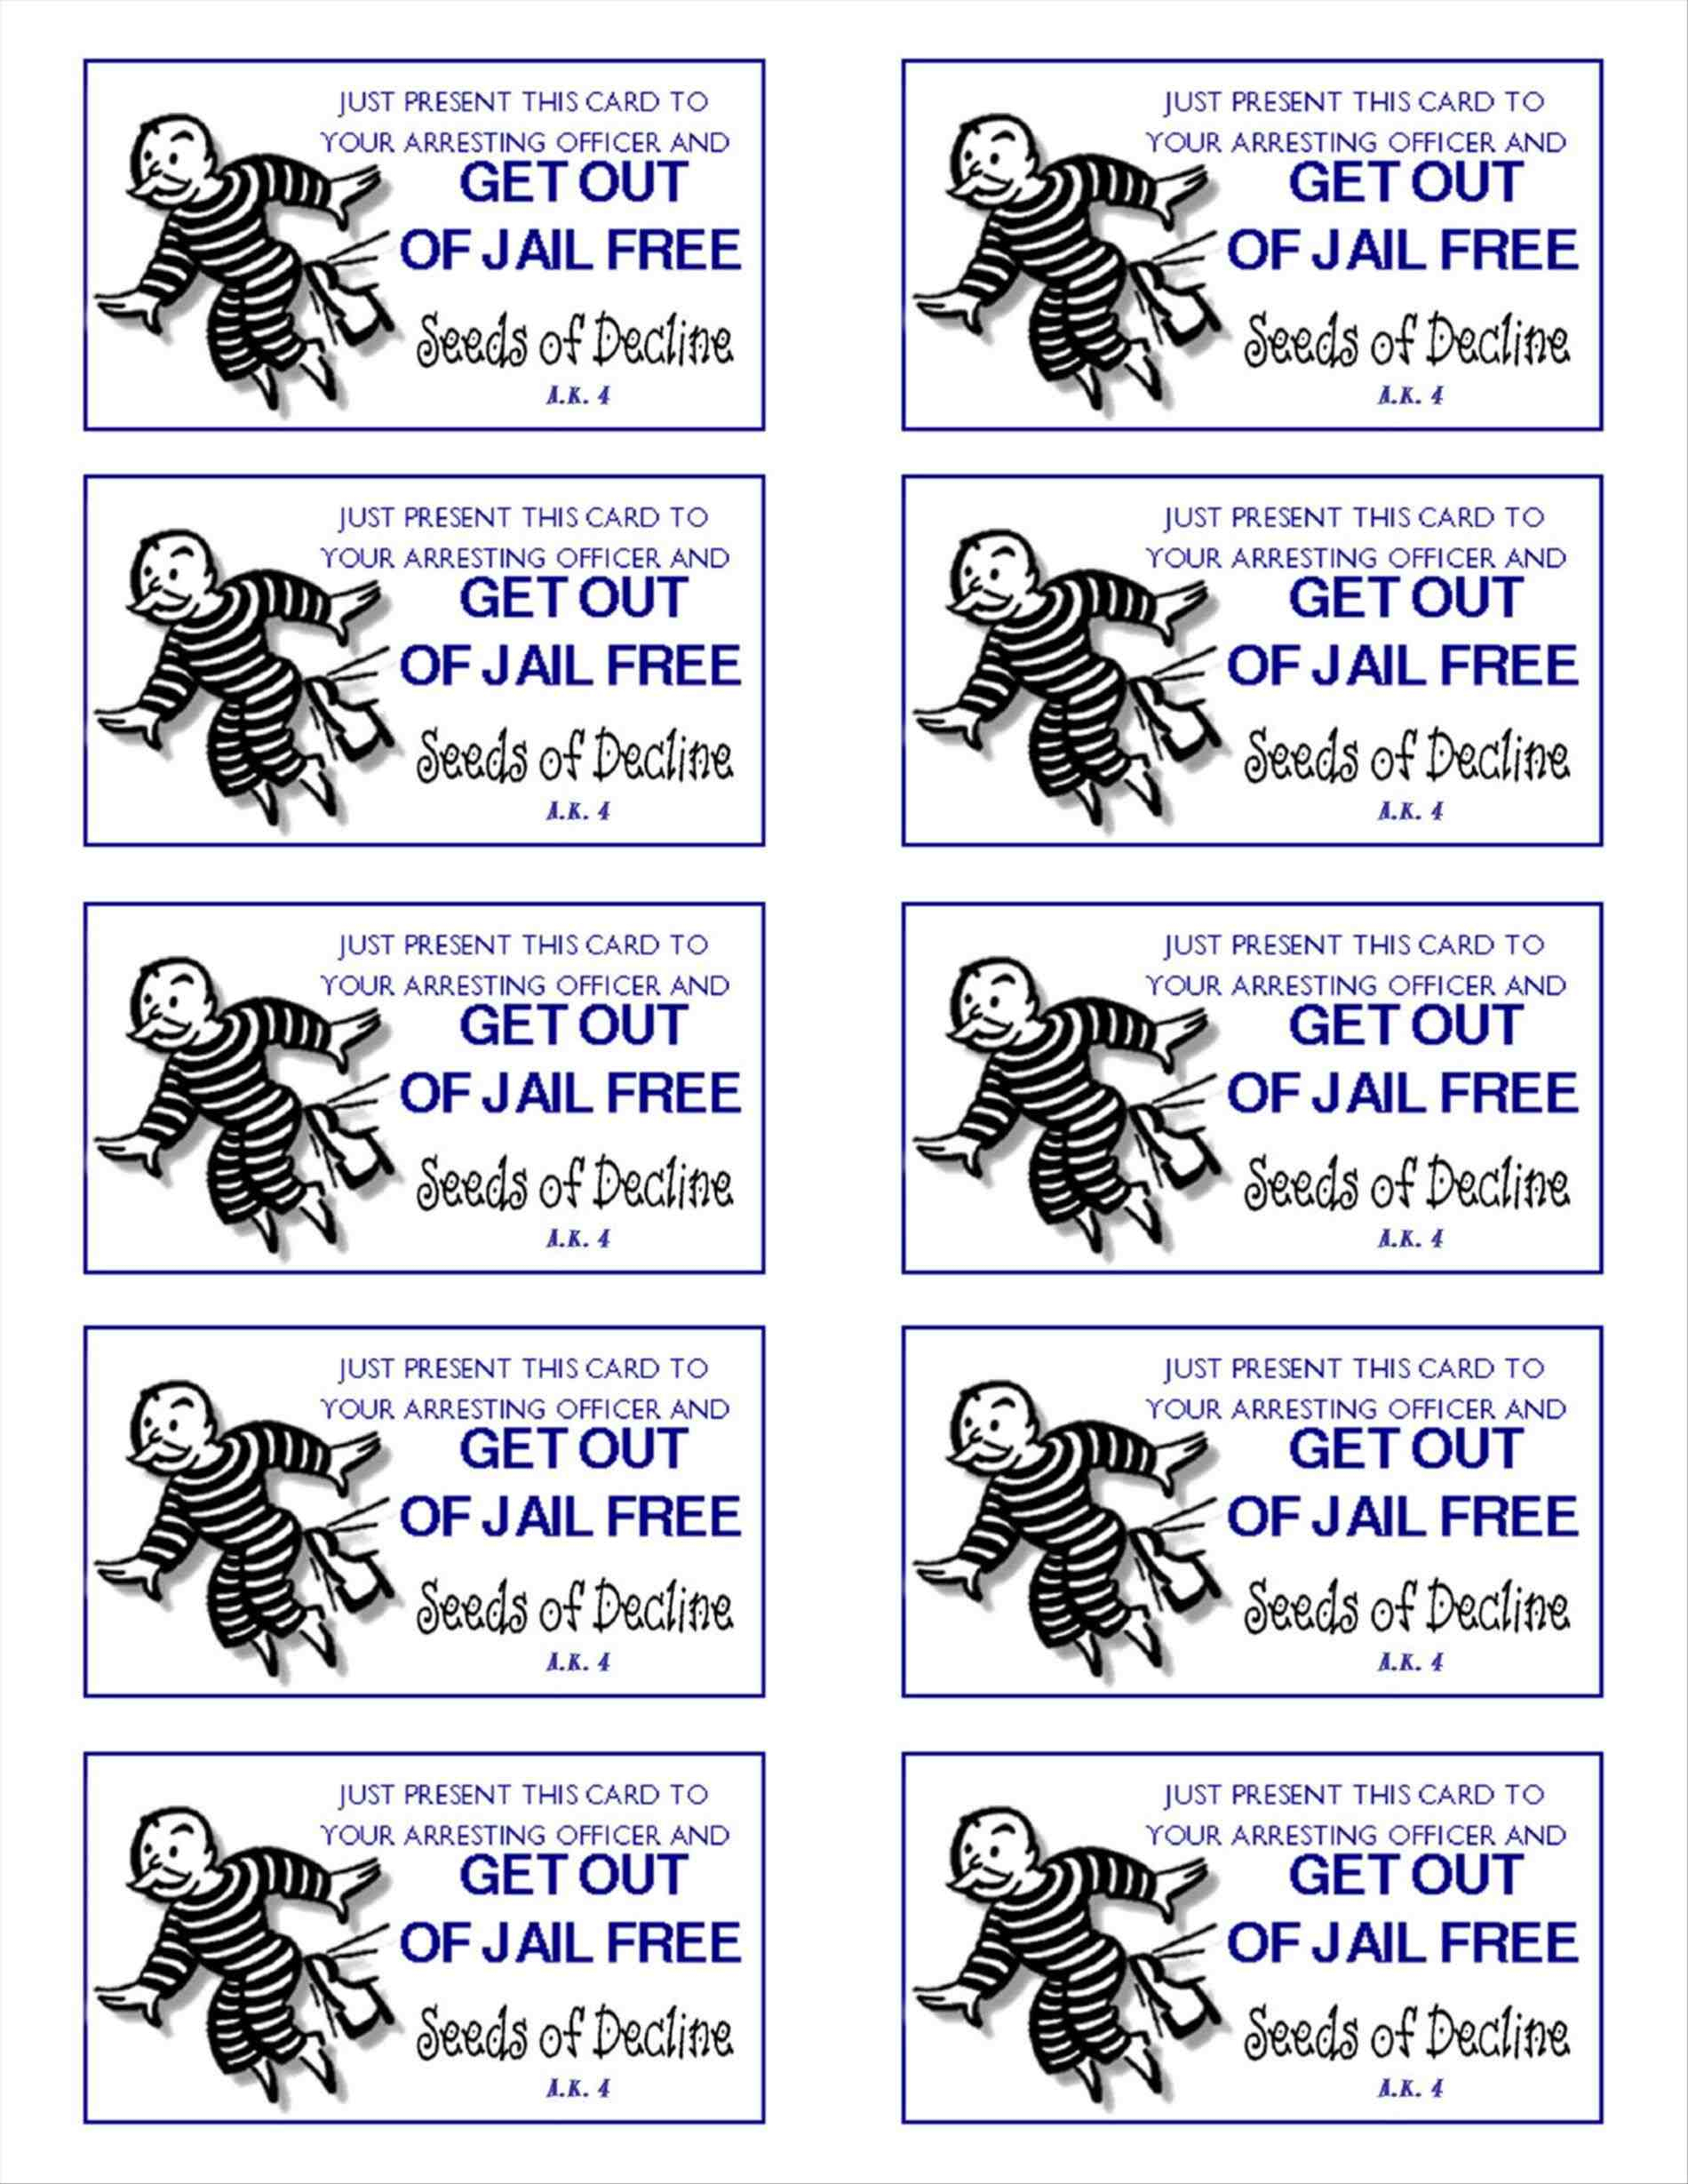 Get Out Of Free Card Template 28 Images Prisons Data Driven Cityget - Get Out Of Jail Free Card Printable